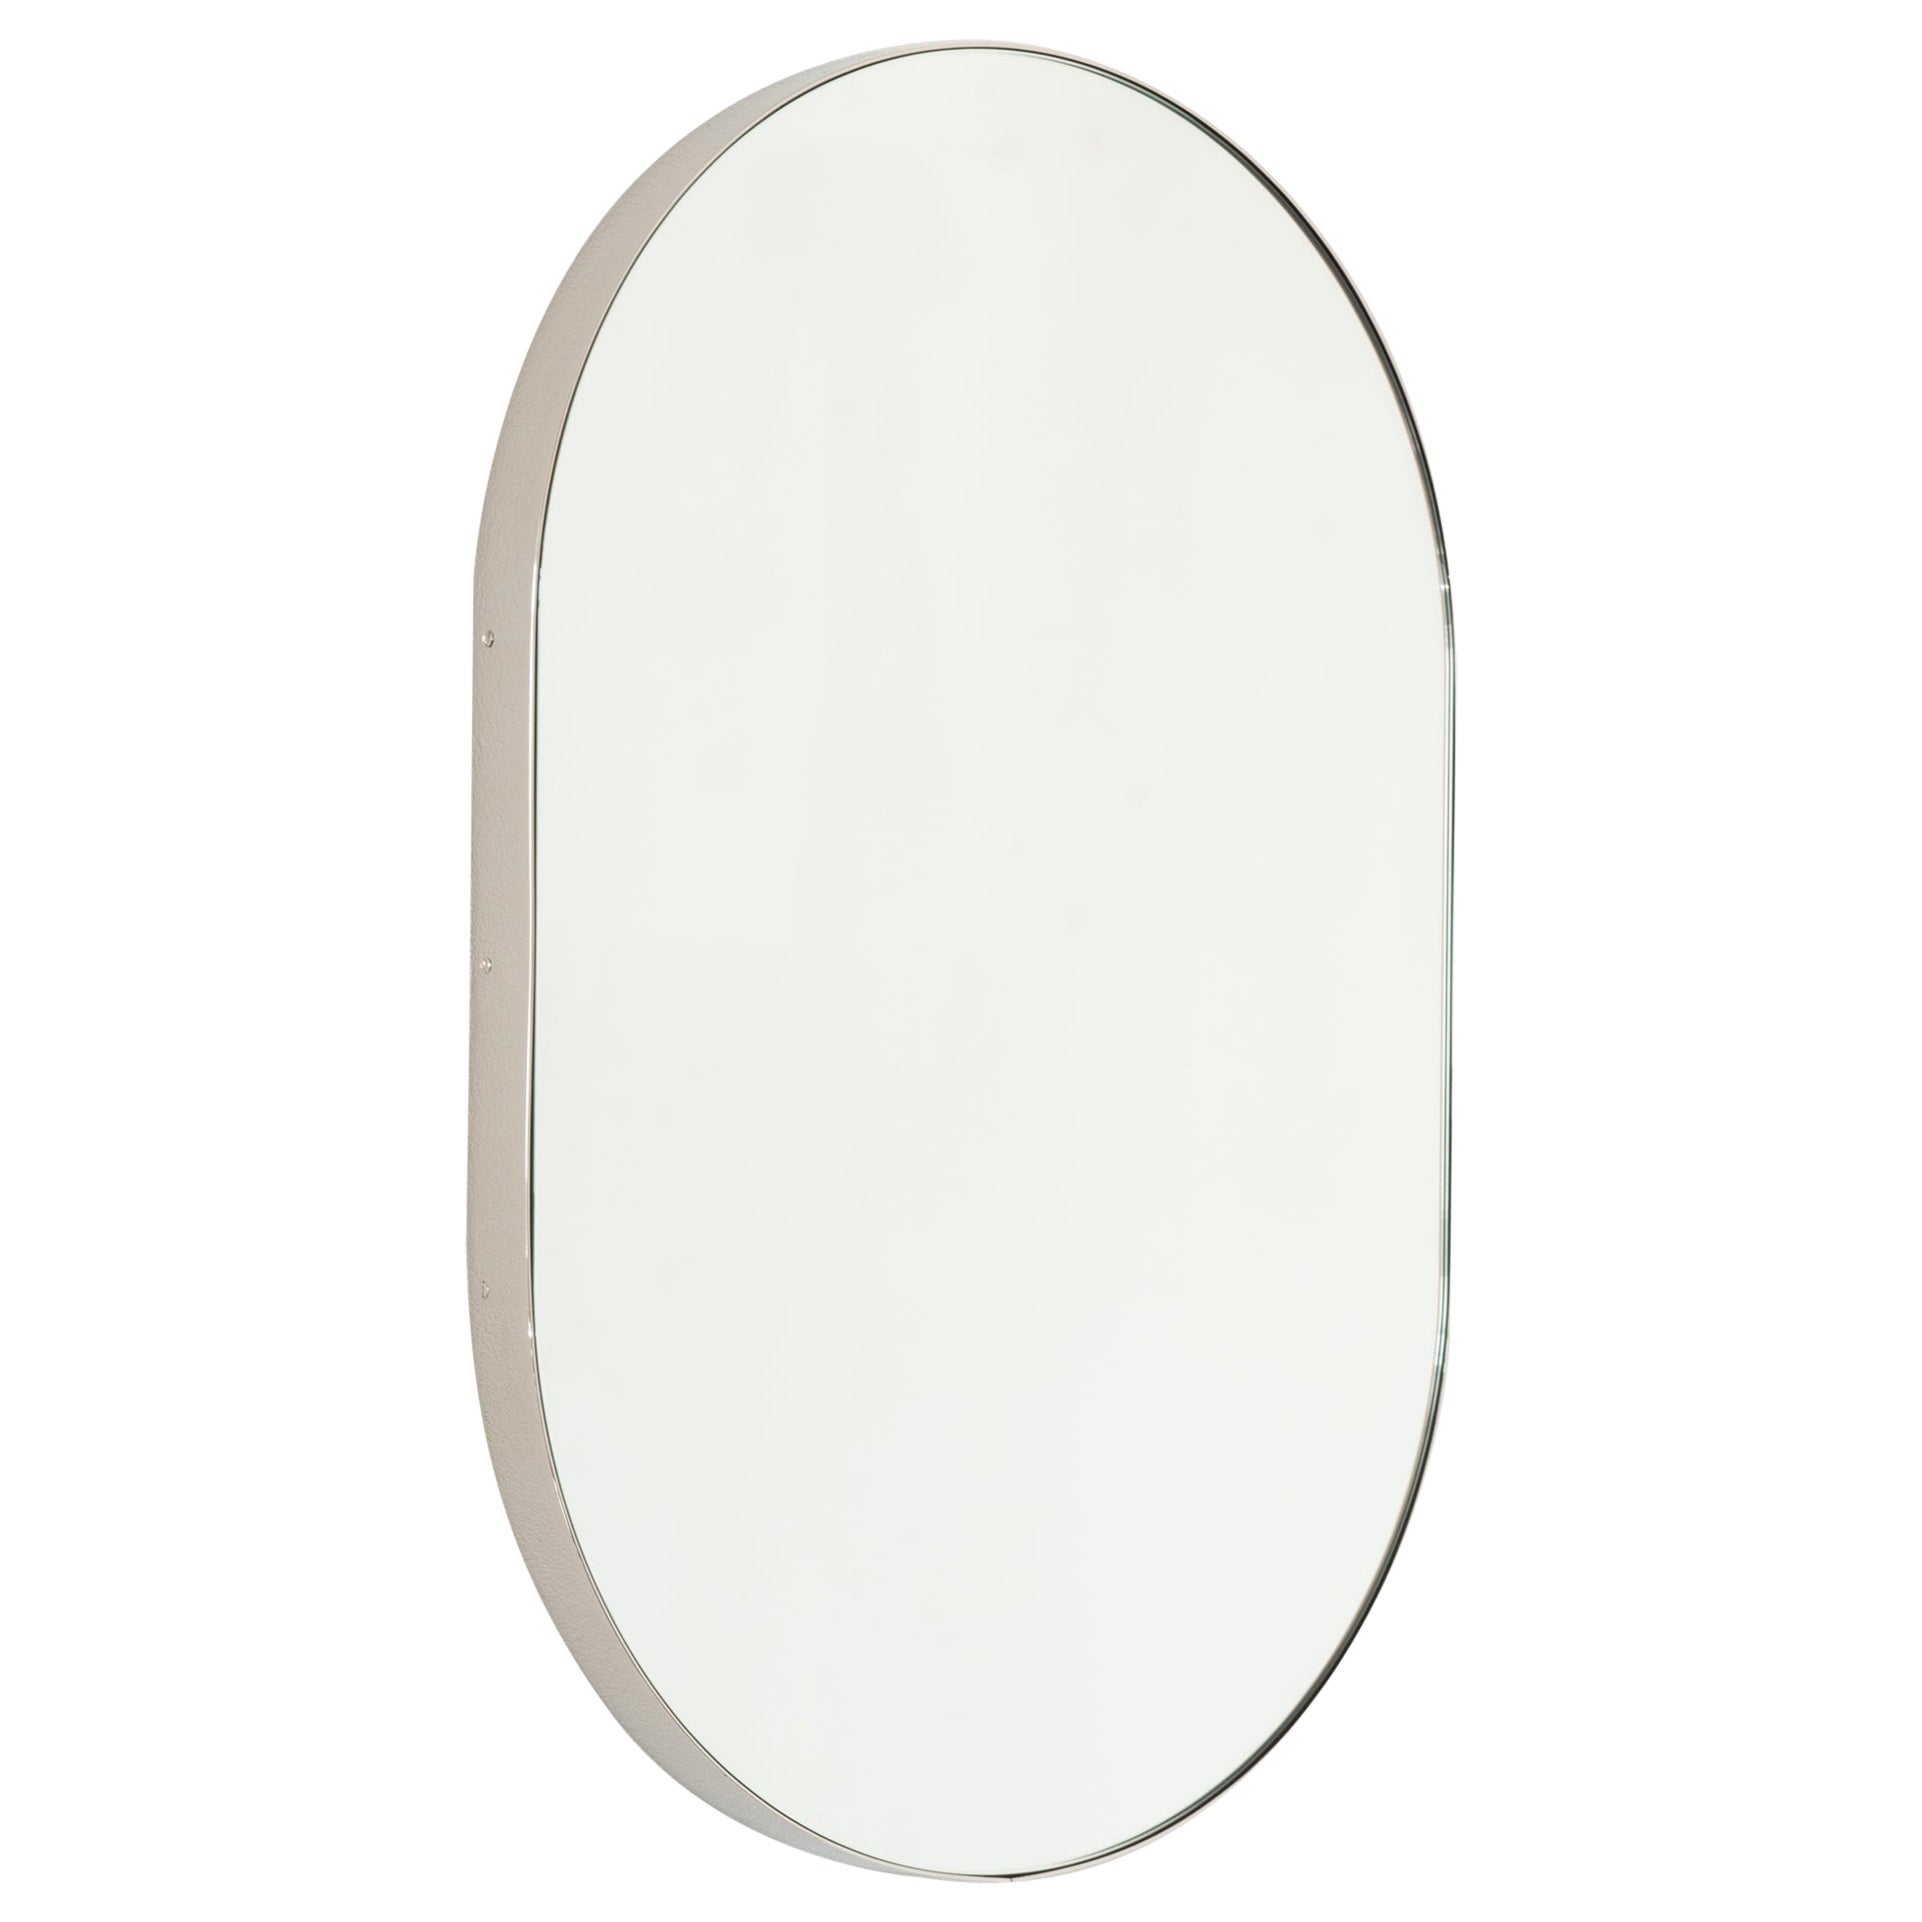 Capsula Pill shaped Customisable Contemporary Mirror, Nickel Plated Frame, Small